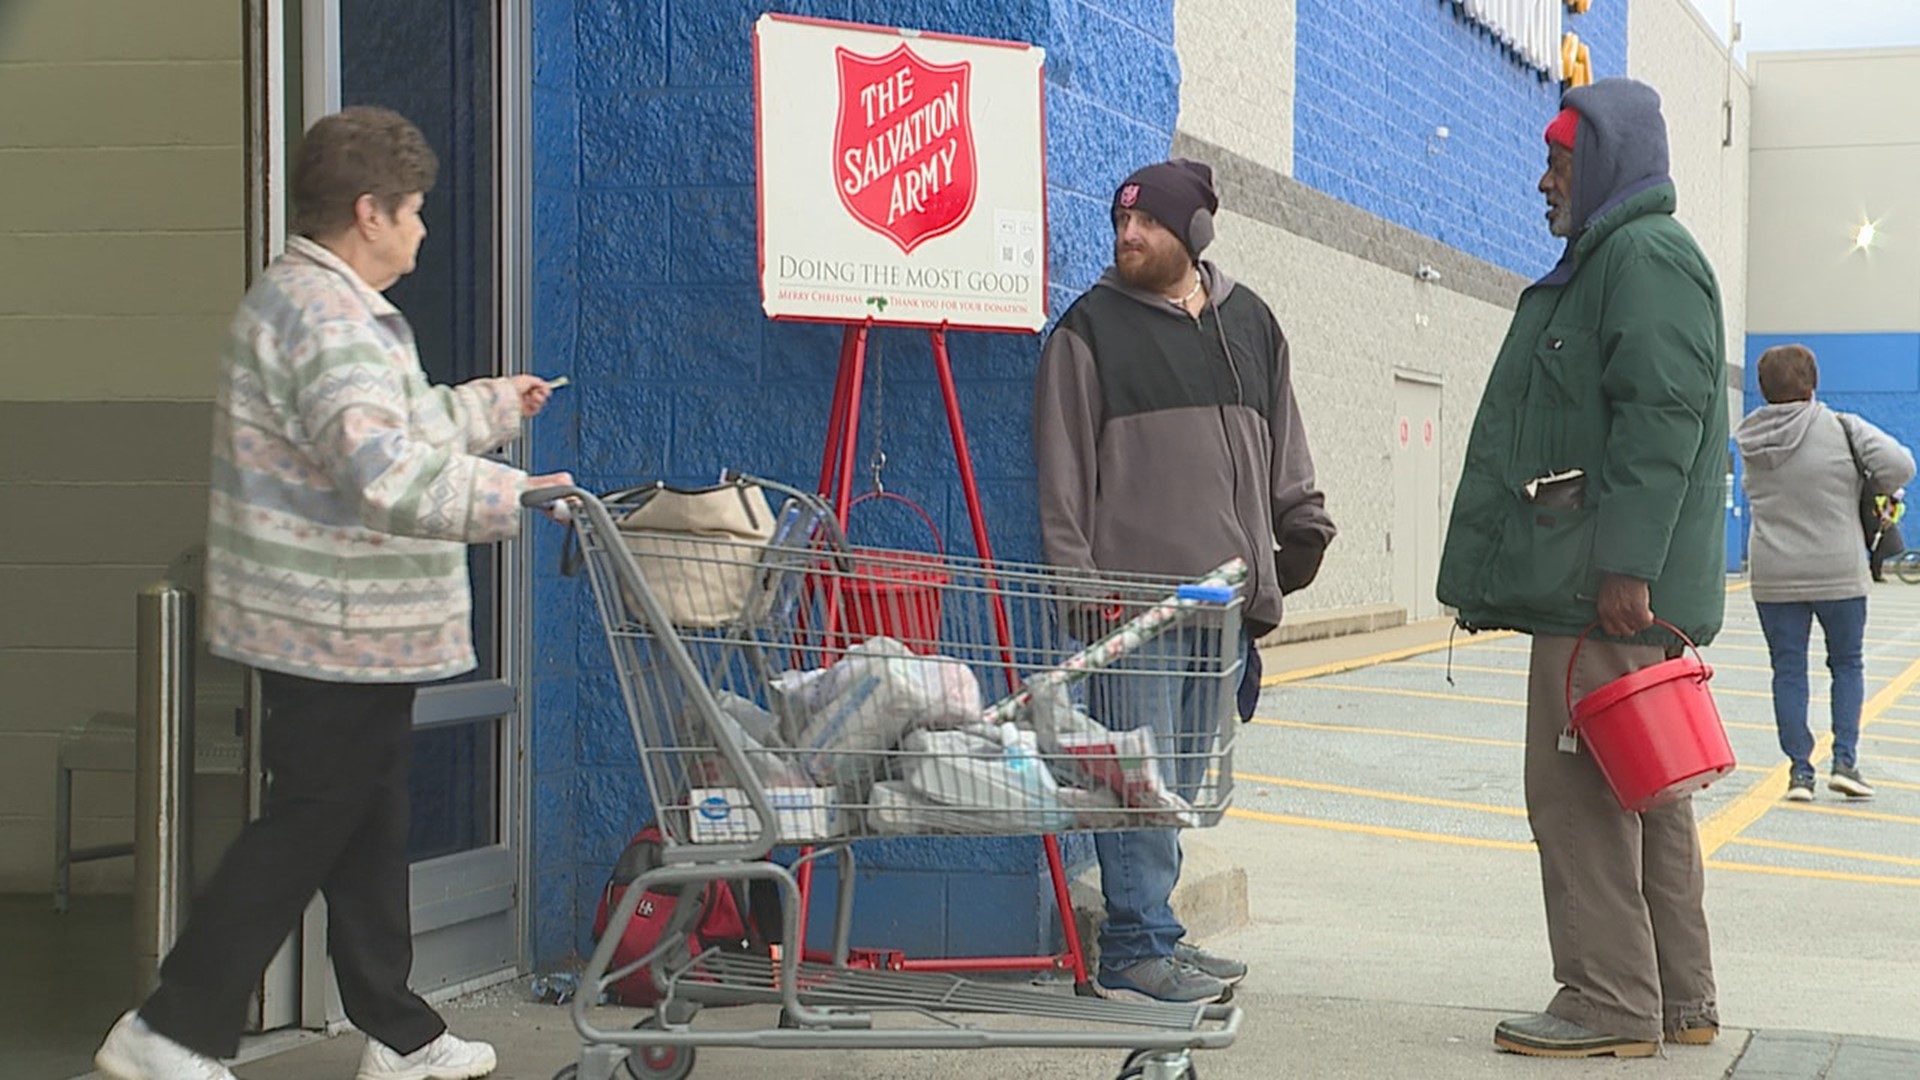 Salvation Army offering rides to warming shelters for Spokane's homeless  population | krem.com